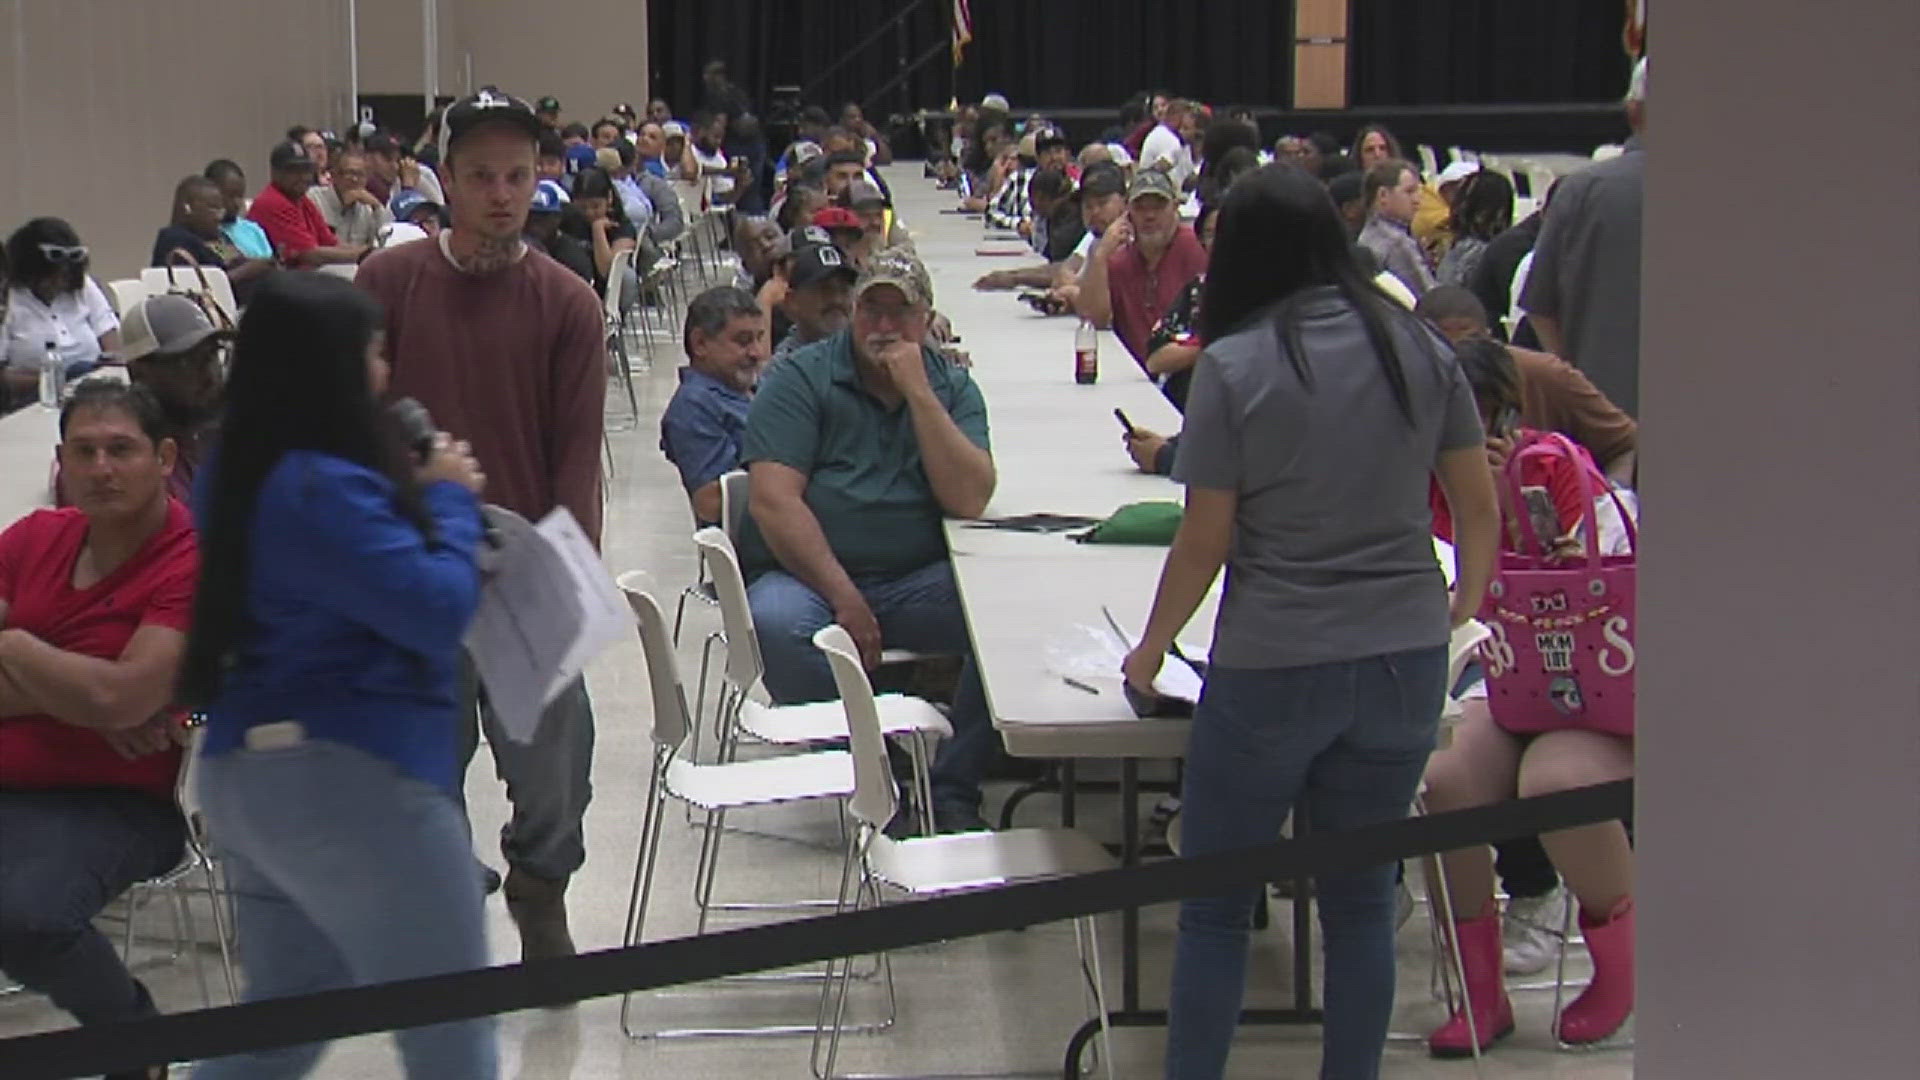 Workers had the opportunity to meet with Bechtel recruiters at the Bowers Civic Center in Port Arthur